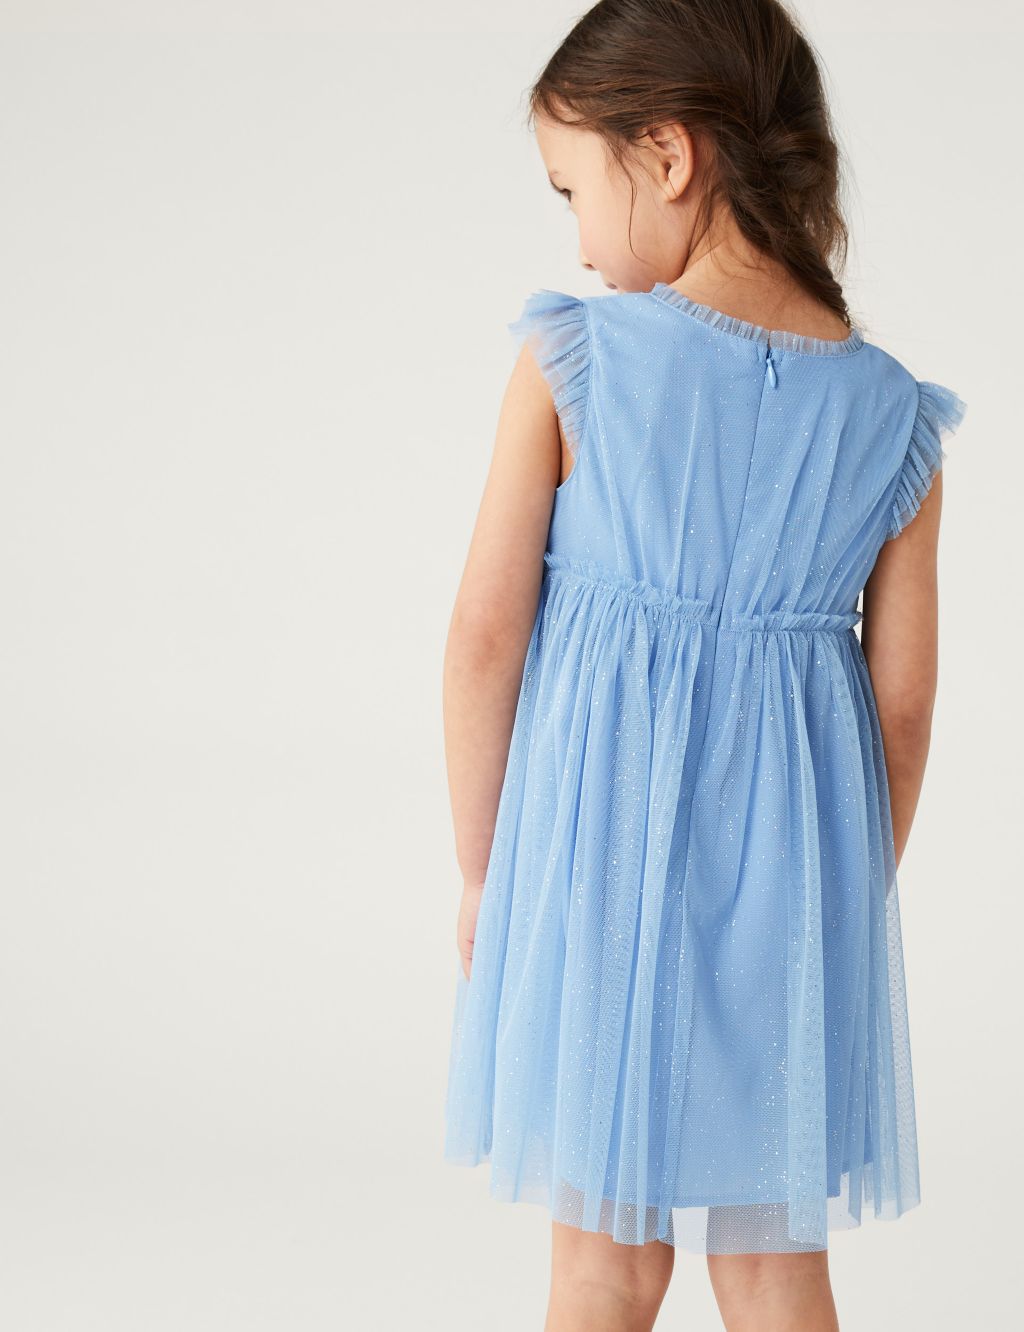 Butterfly Applique Tulle Dress (2-8 Yrs) image 3